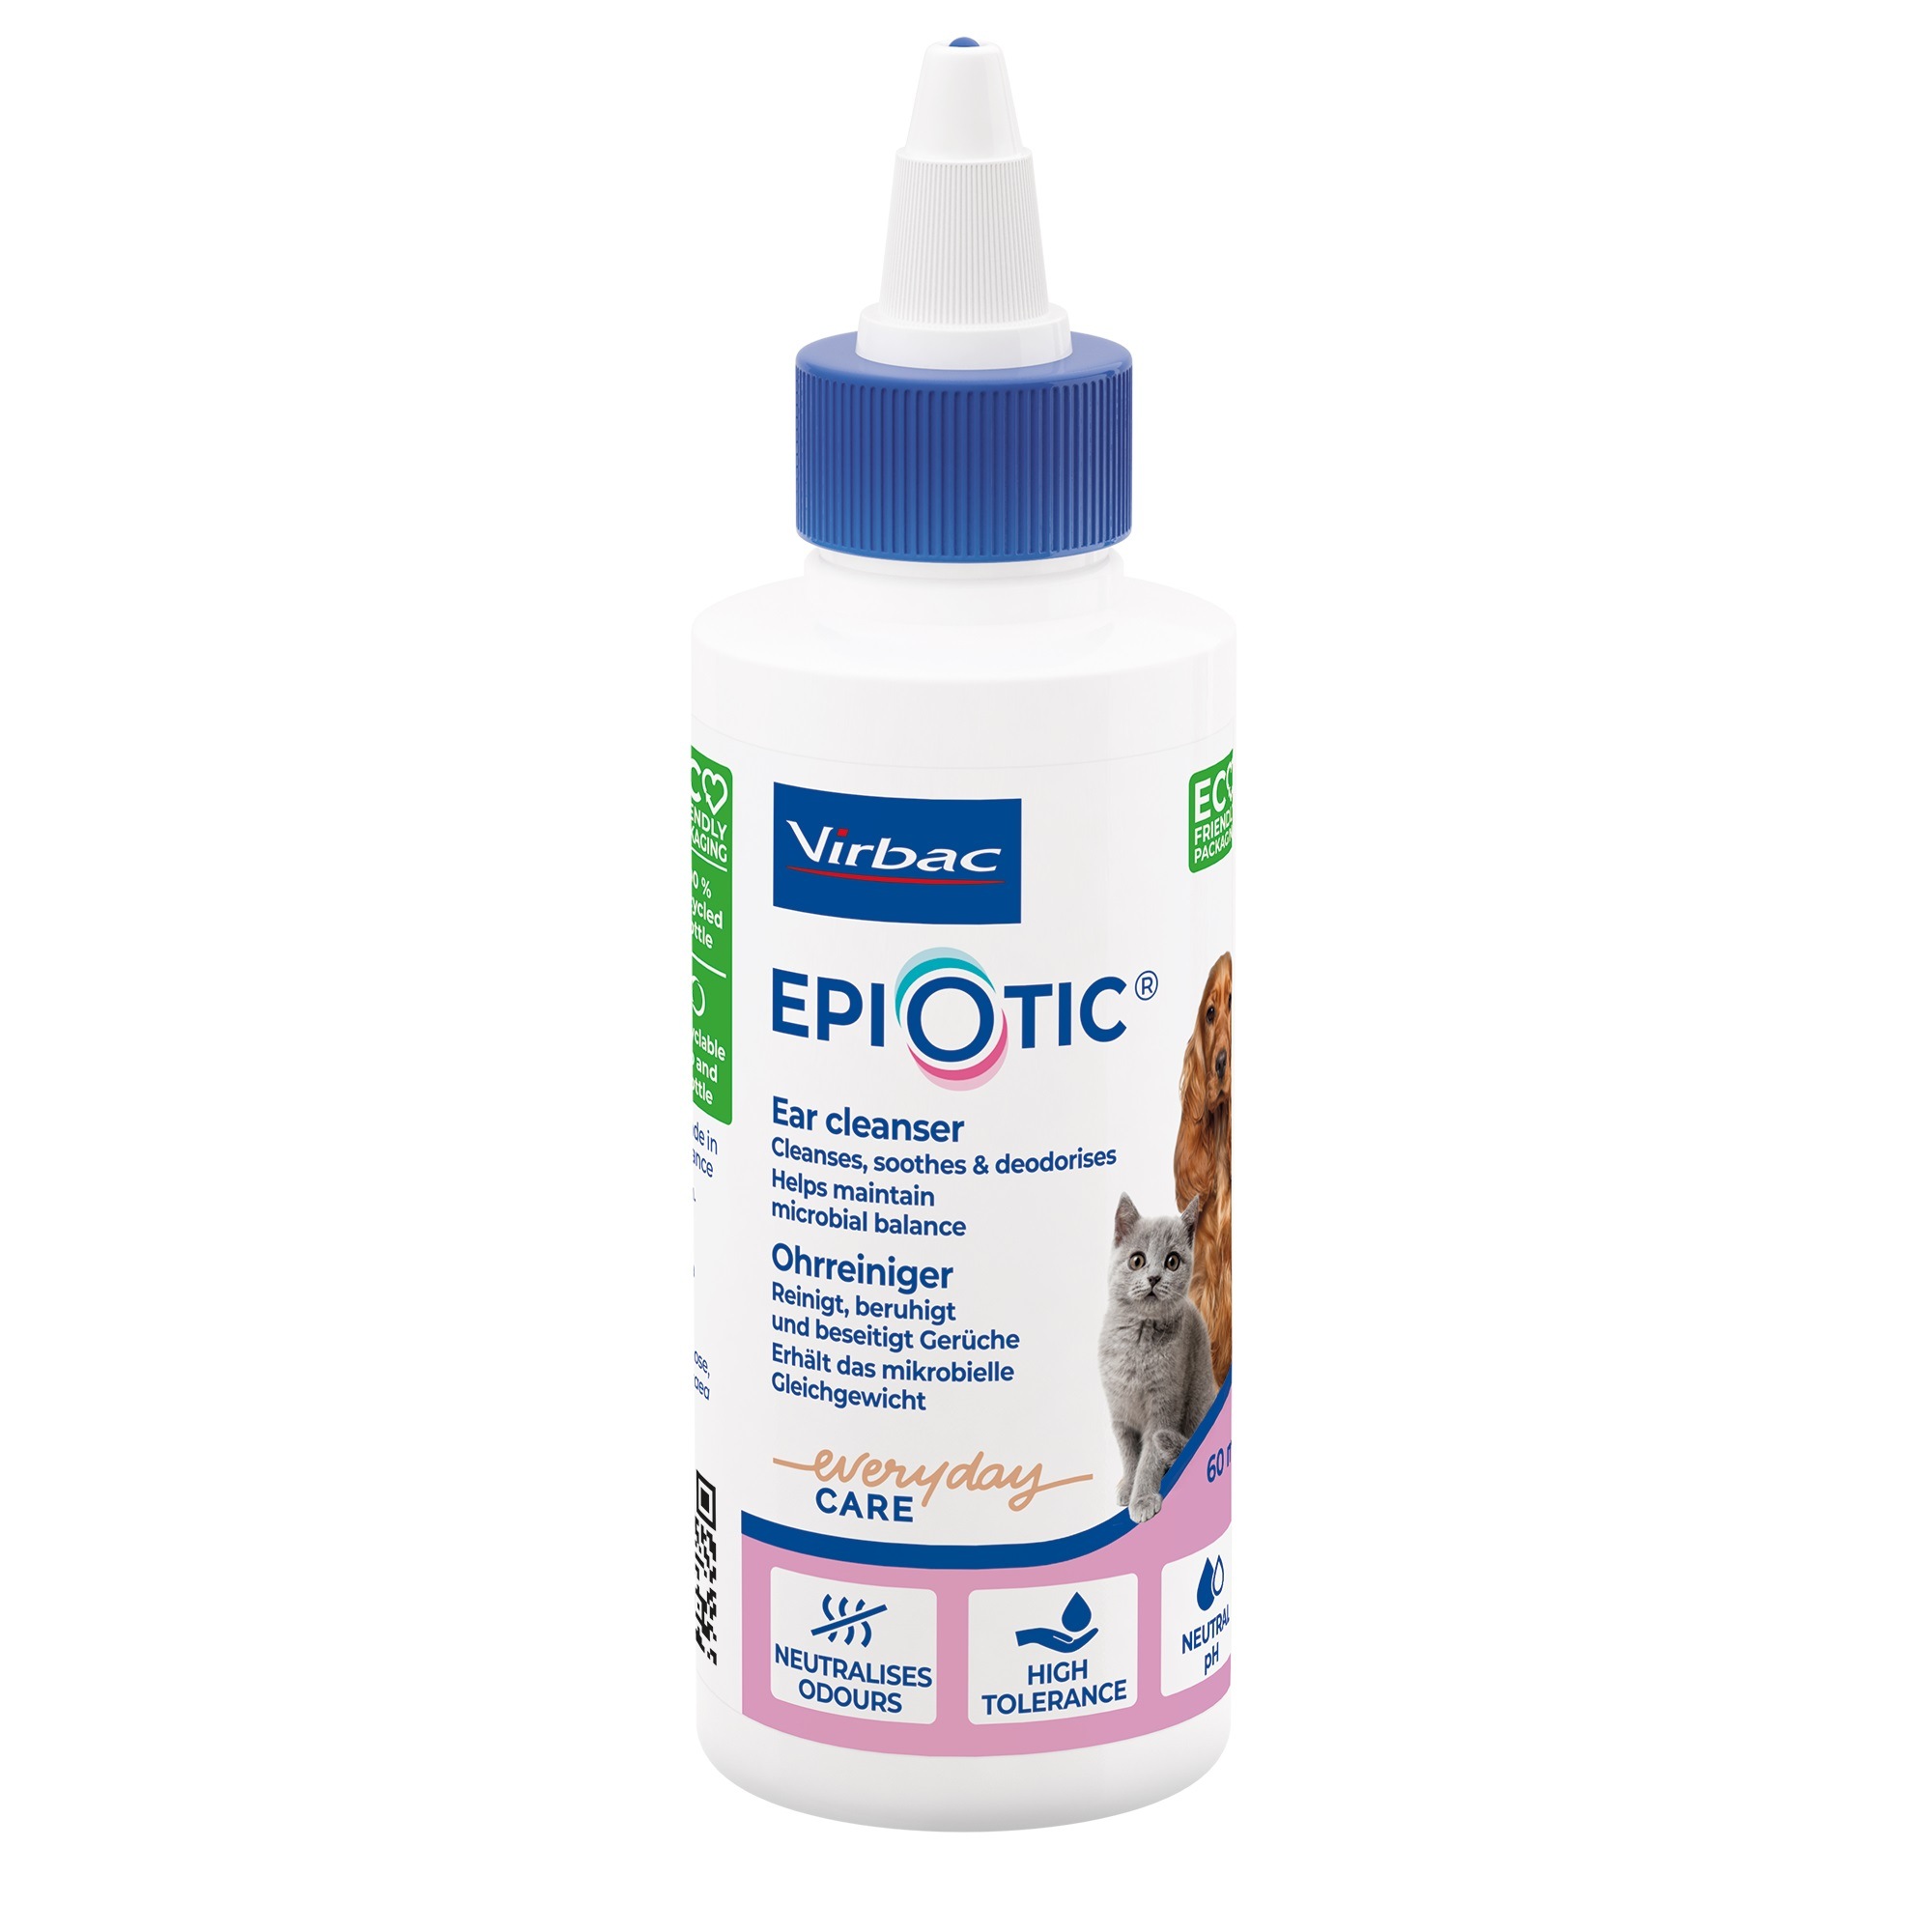 Epi-Otic Advanced Ear Cleanser for Dogs, Cats, Puppies and Kittens Virbac -  Ear Care, Health